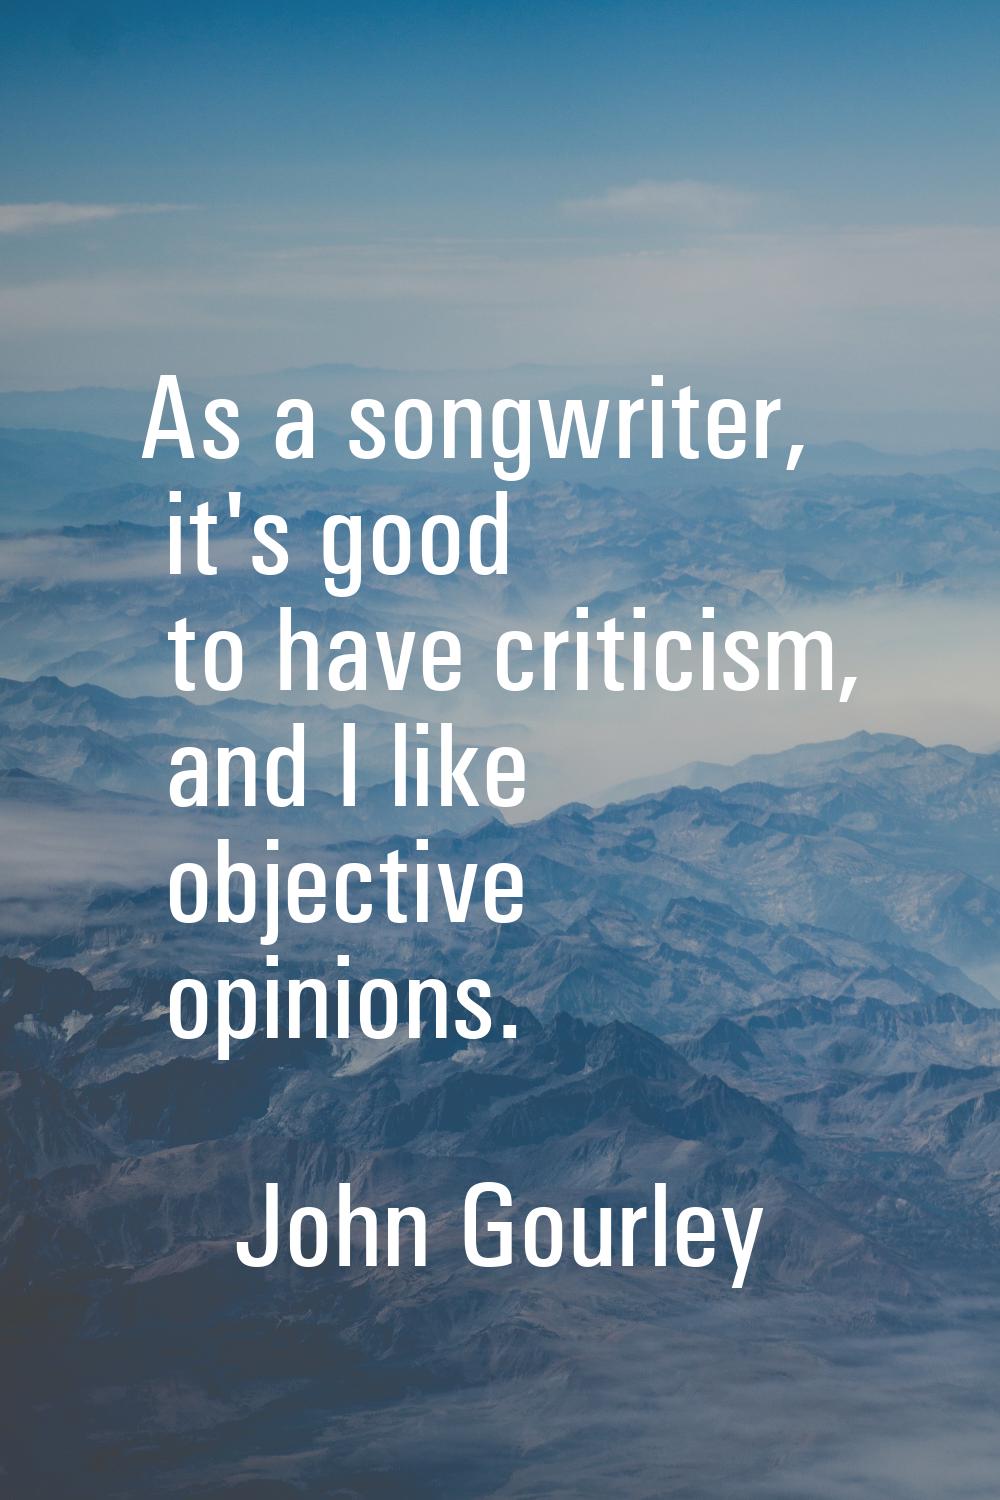 As a songwriter, it's good to have criticism, and I like objective opinions.